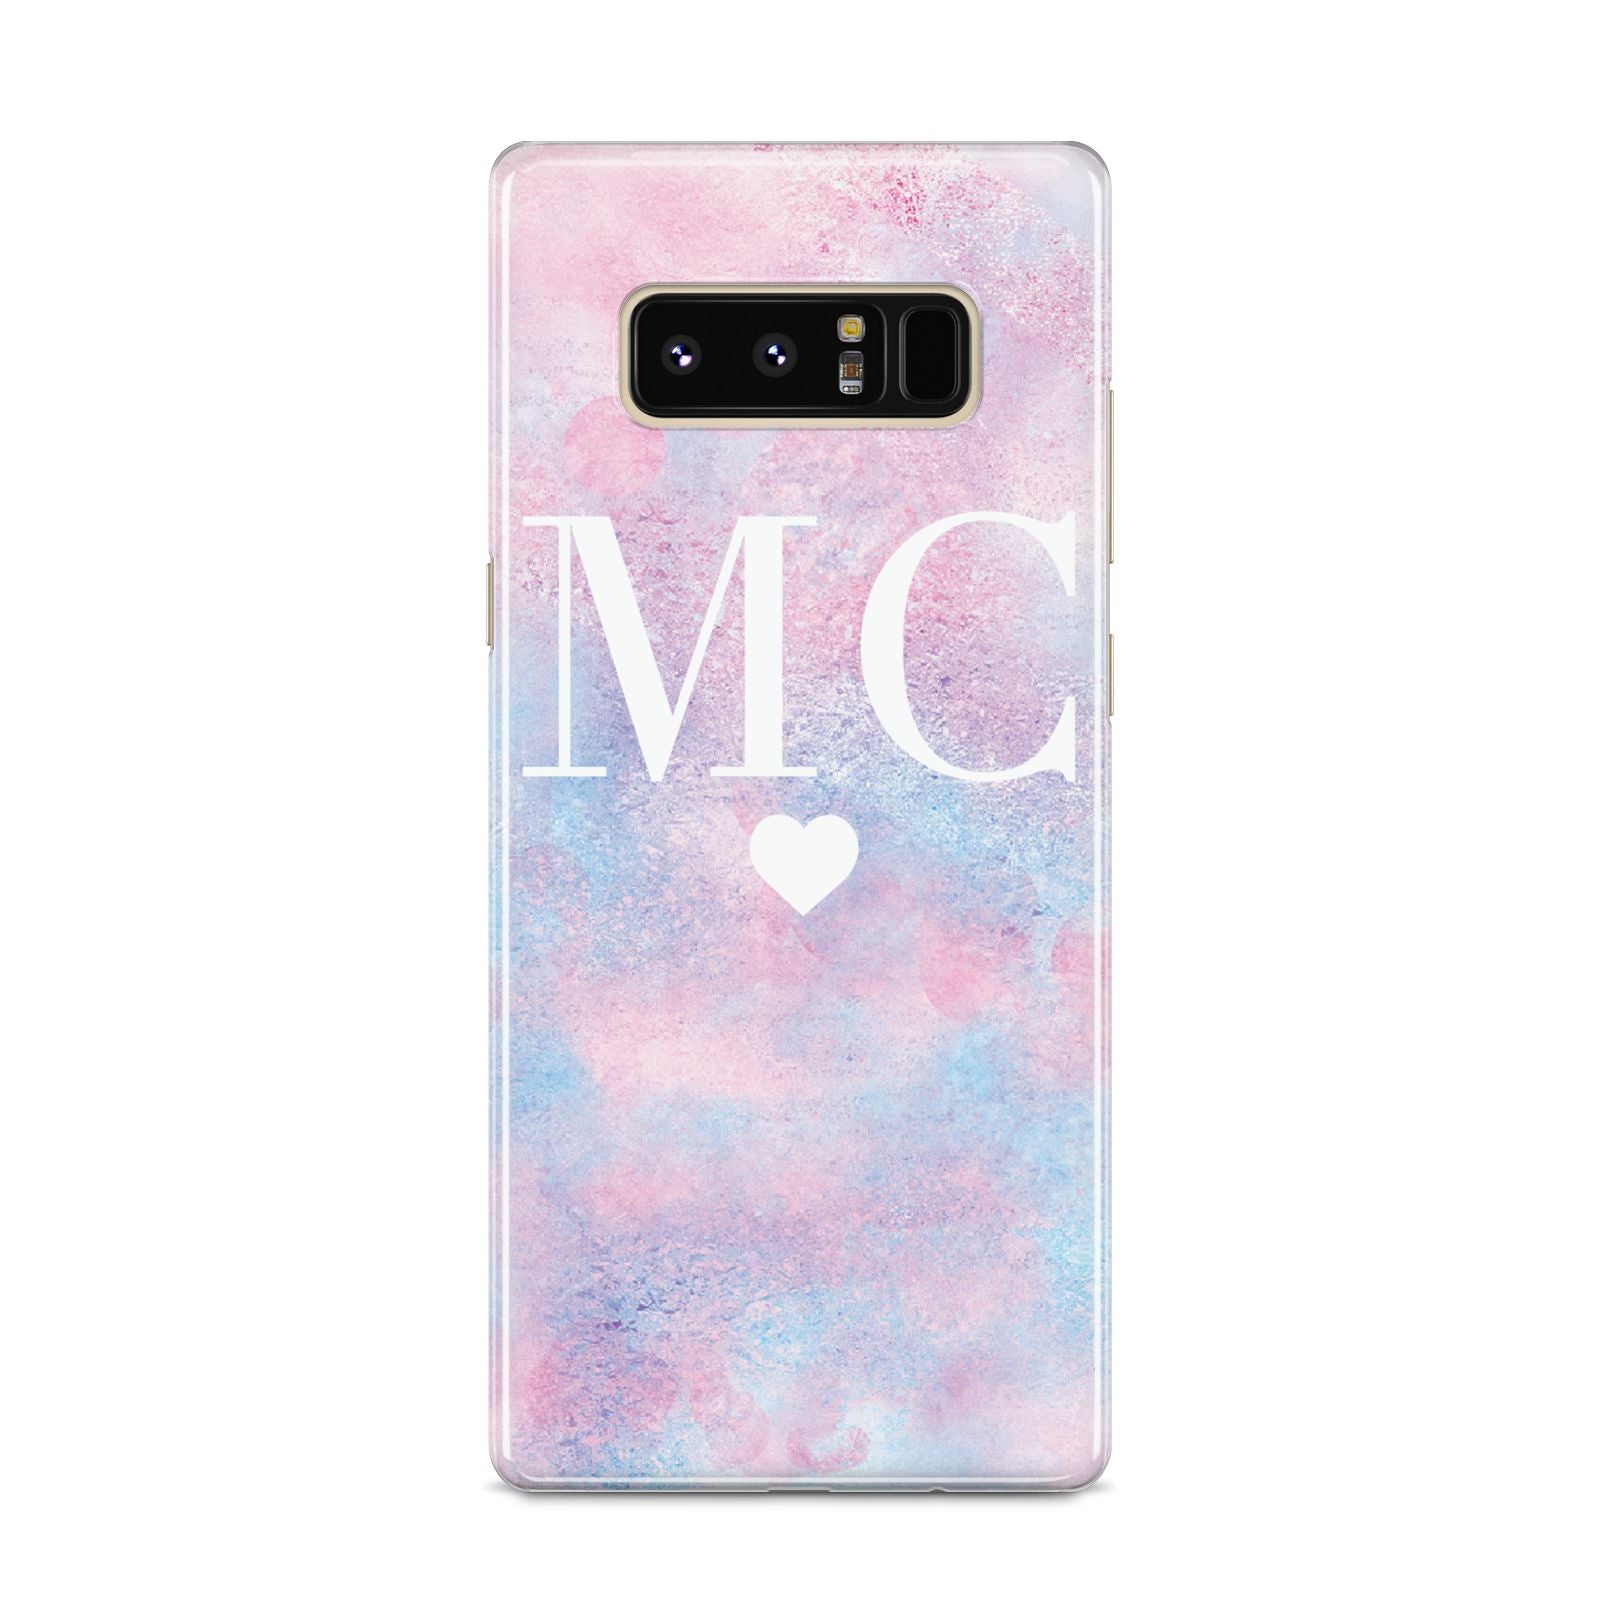 Personalised Cotton Candy Marble Initials Samsung Galaxy S8 Case